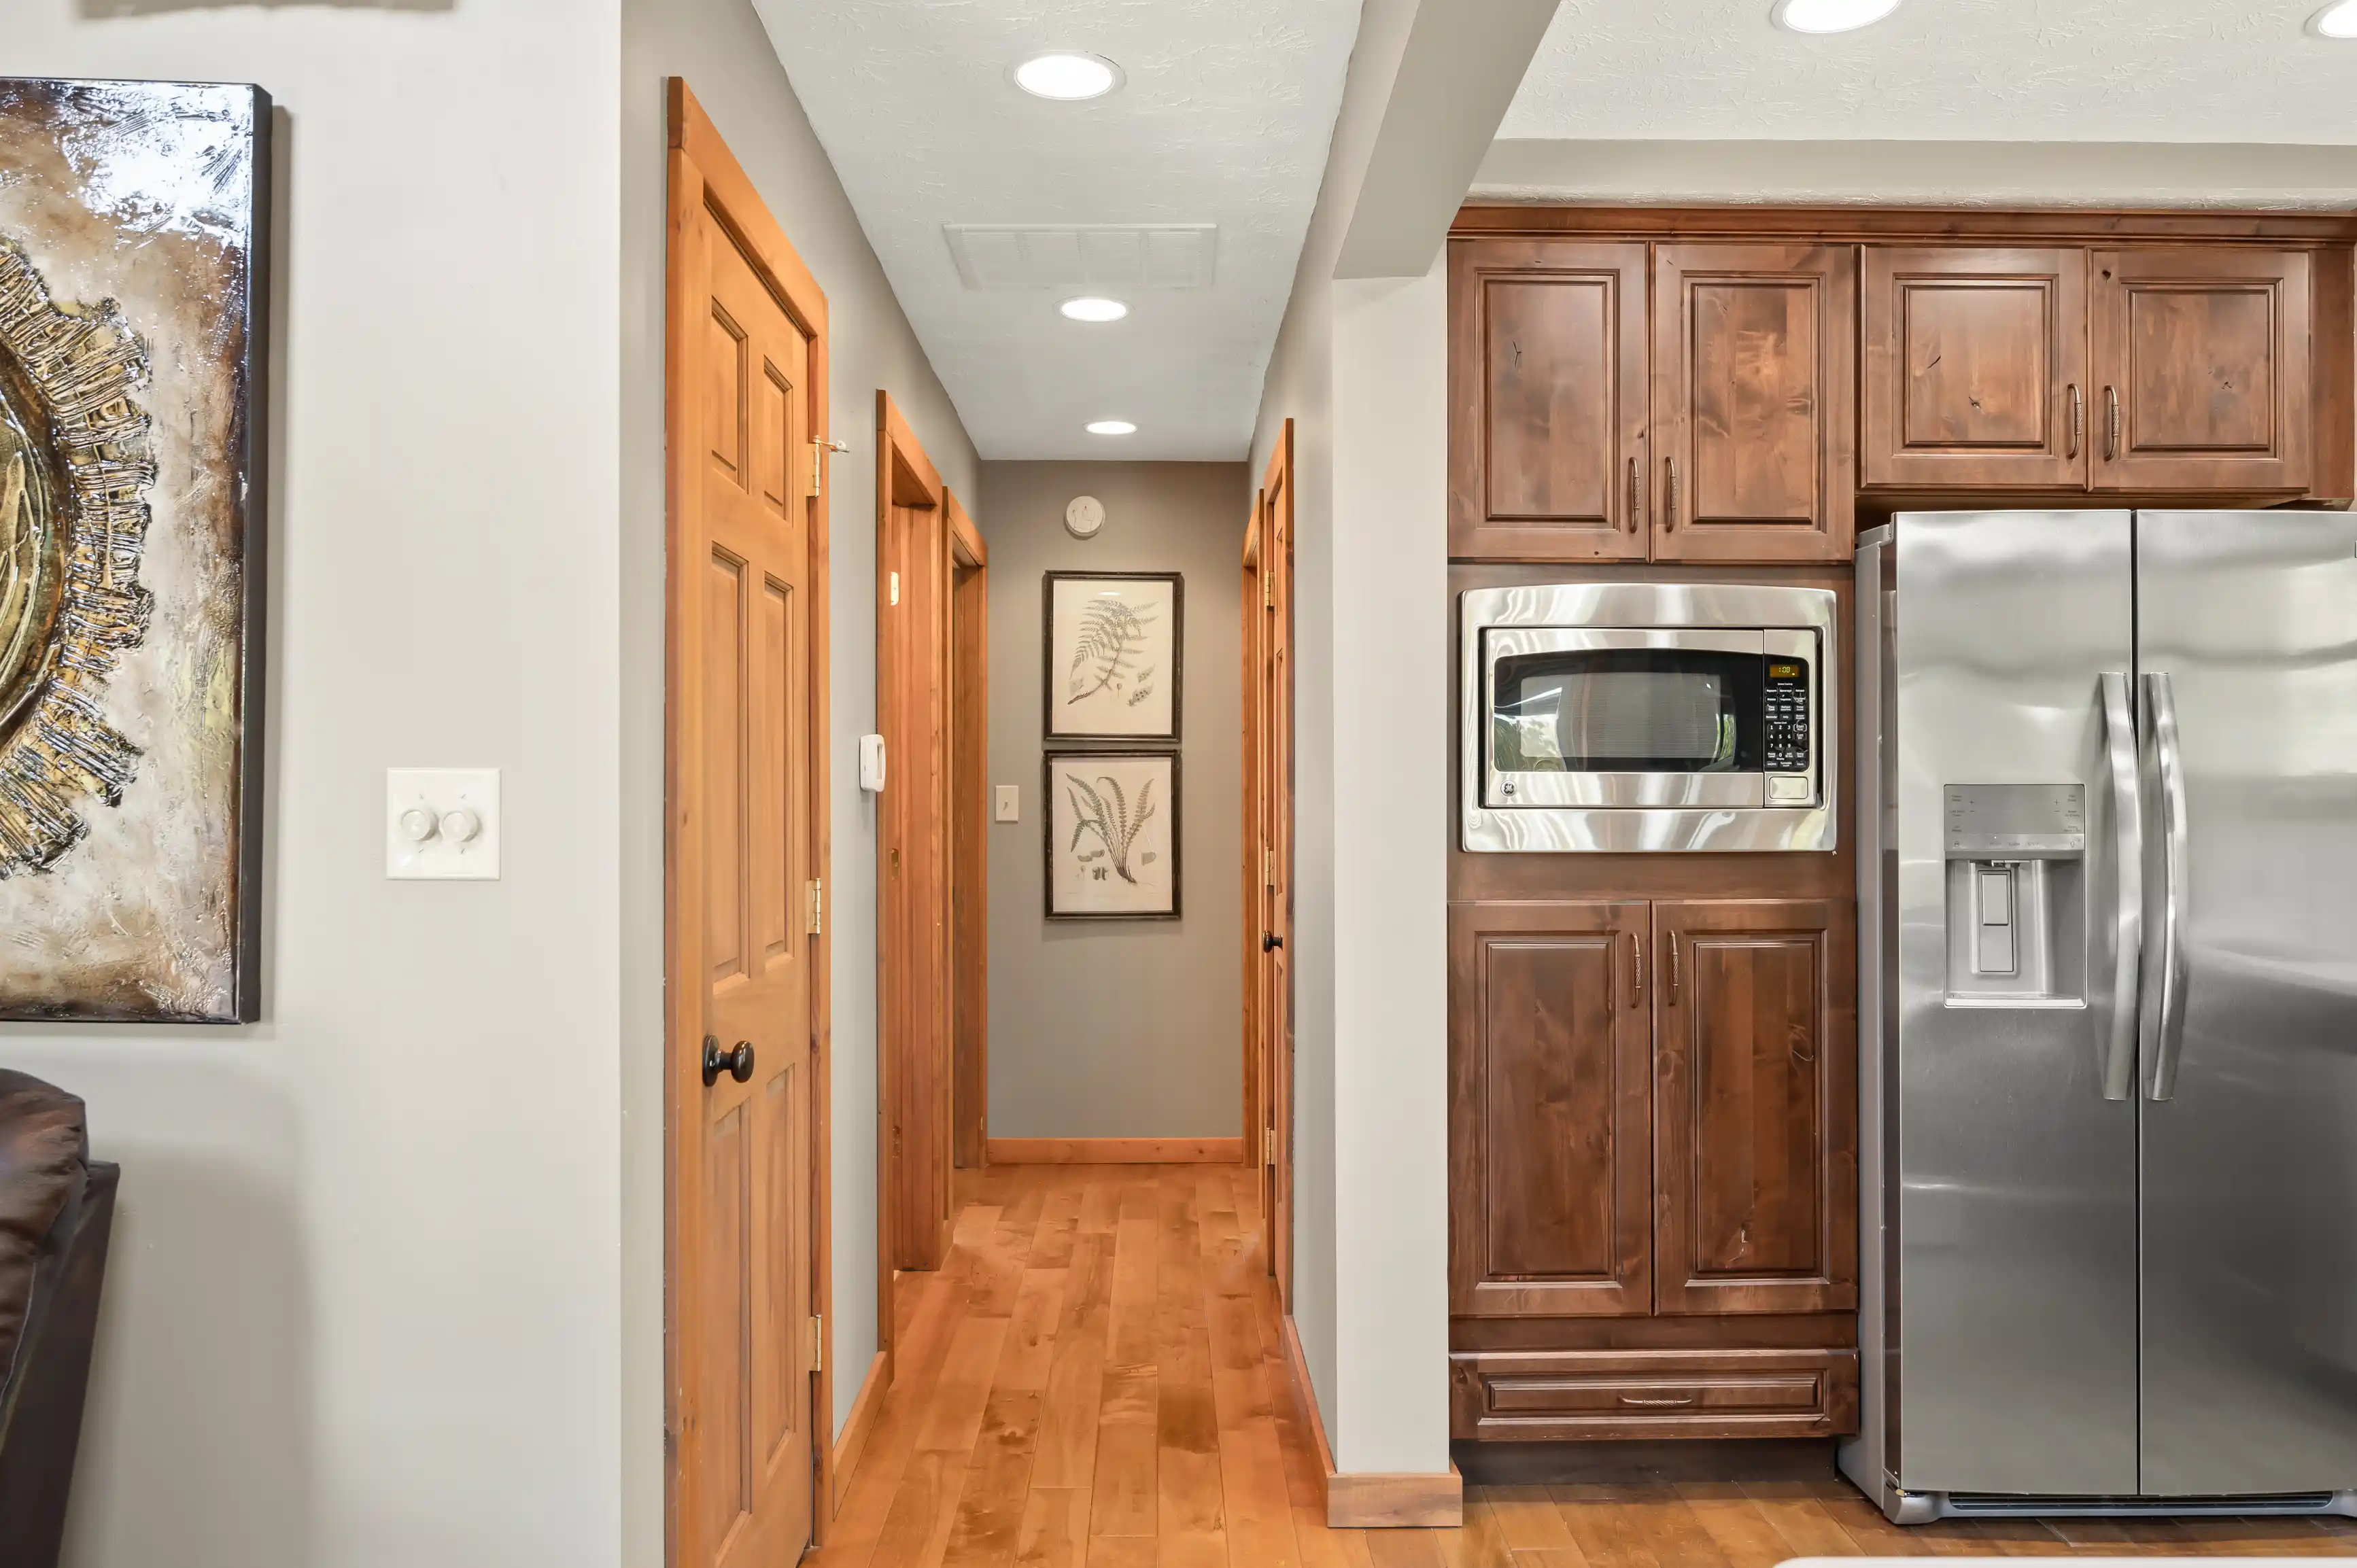 Interior view of a modern kitchen with stainless steel appliances, wooden cabinetry, and a hallway leading to other rooms, featuring hardwood floors and decorated with wall art.